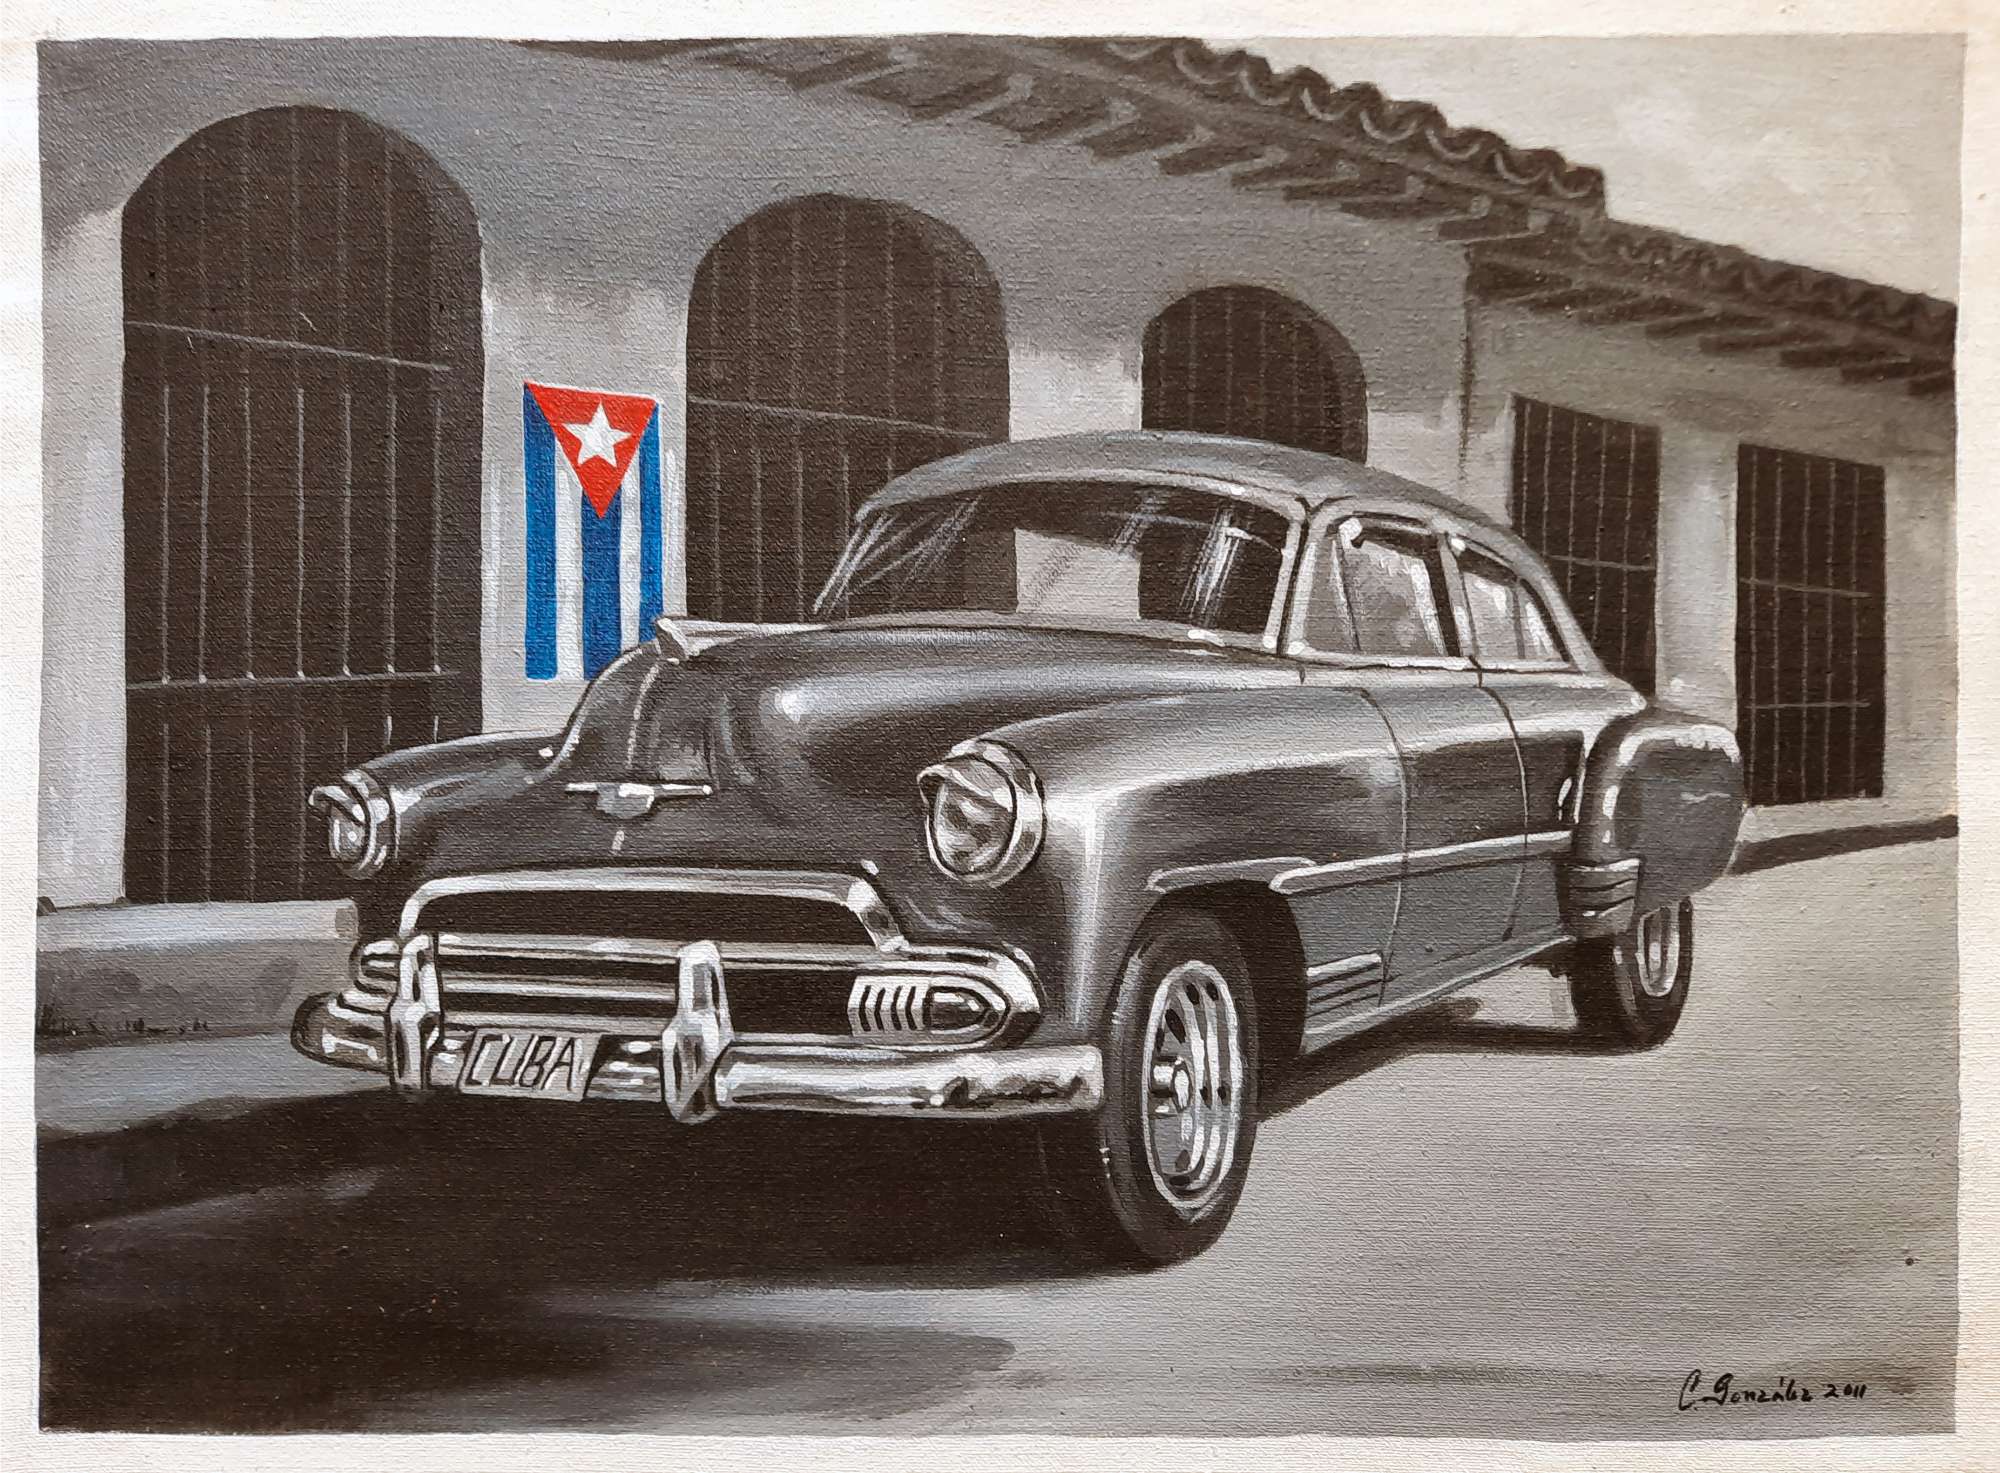 Featured image for “Cuba Chevrolet”